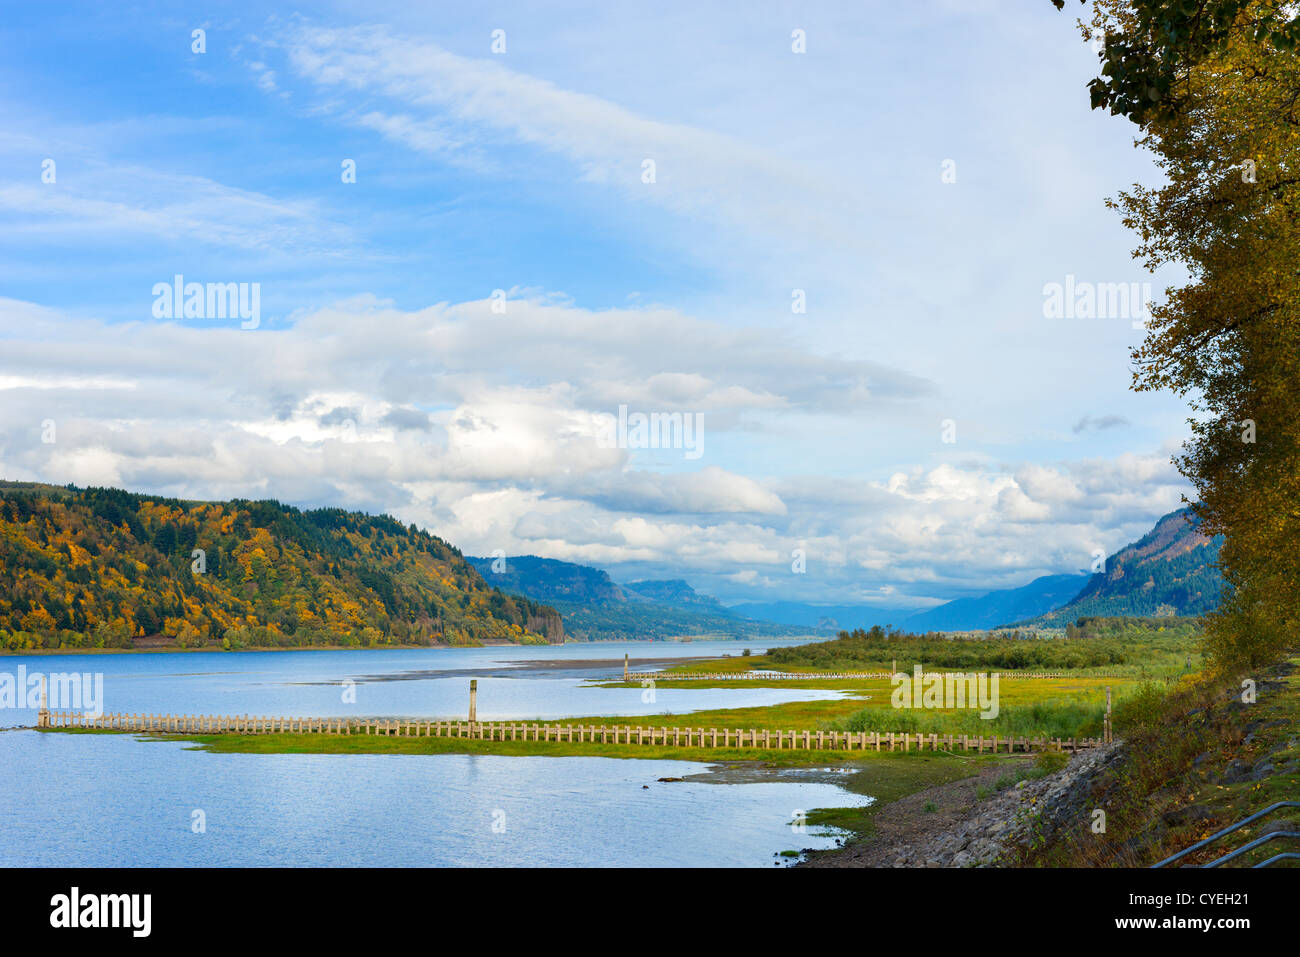 The Columbia River from Rooster Rock State Park, Columbia River Gorge, near Troutdale, Multnomah County, Oregon, USA Stock Photo